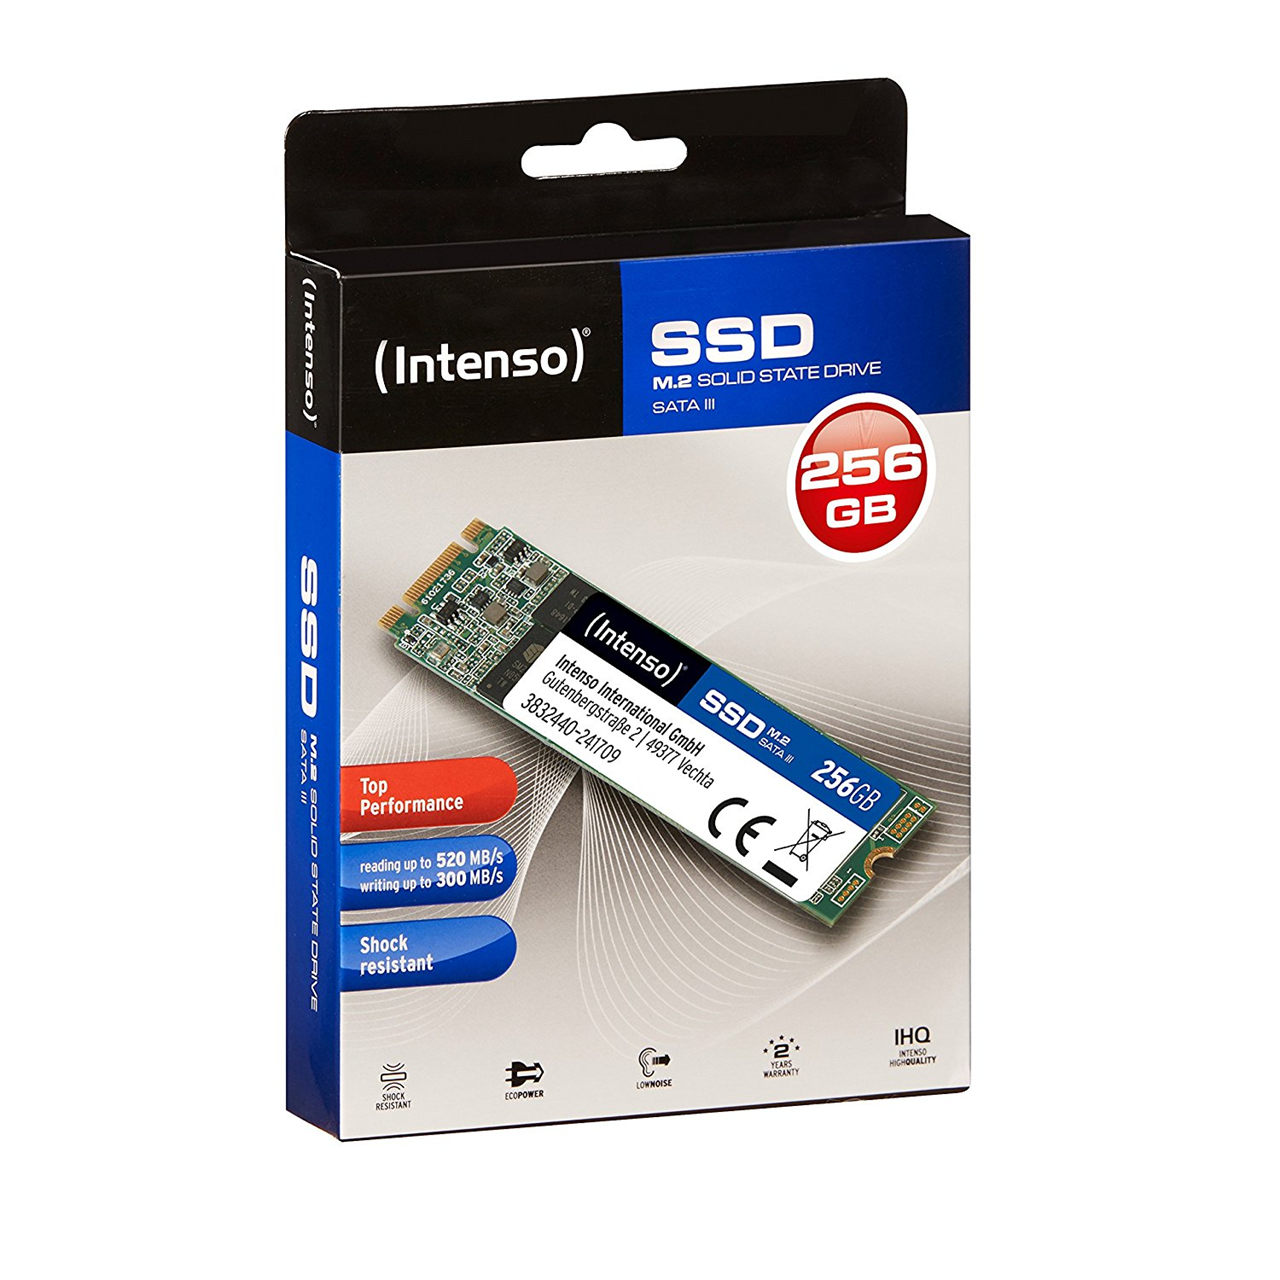 SSD interne Intenso nvme 1 to